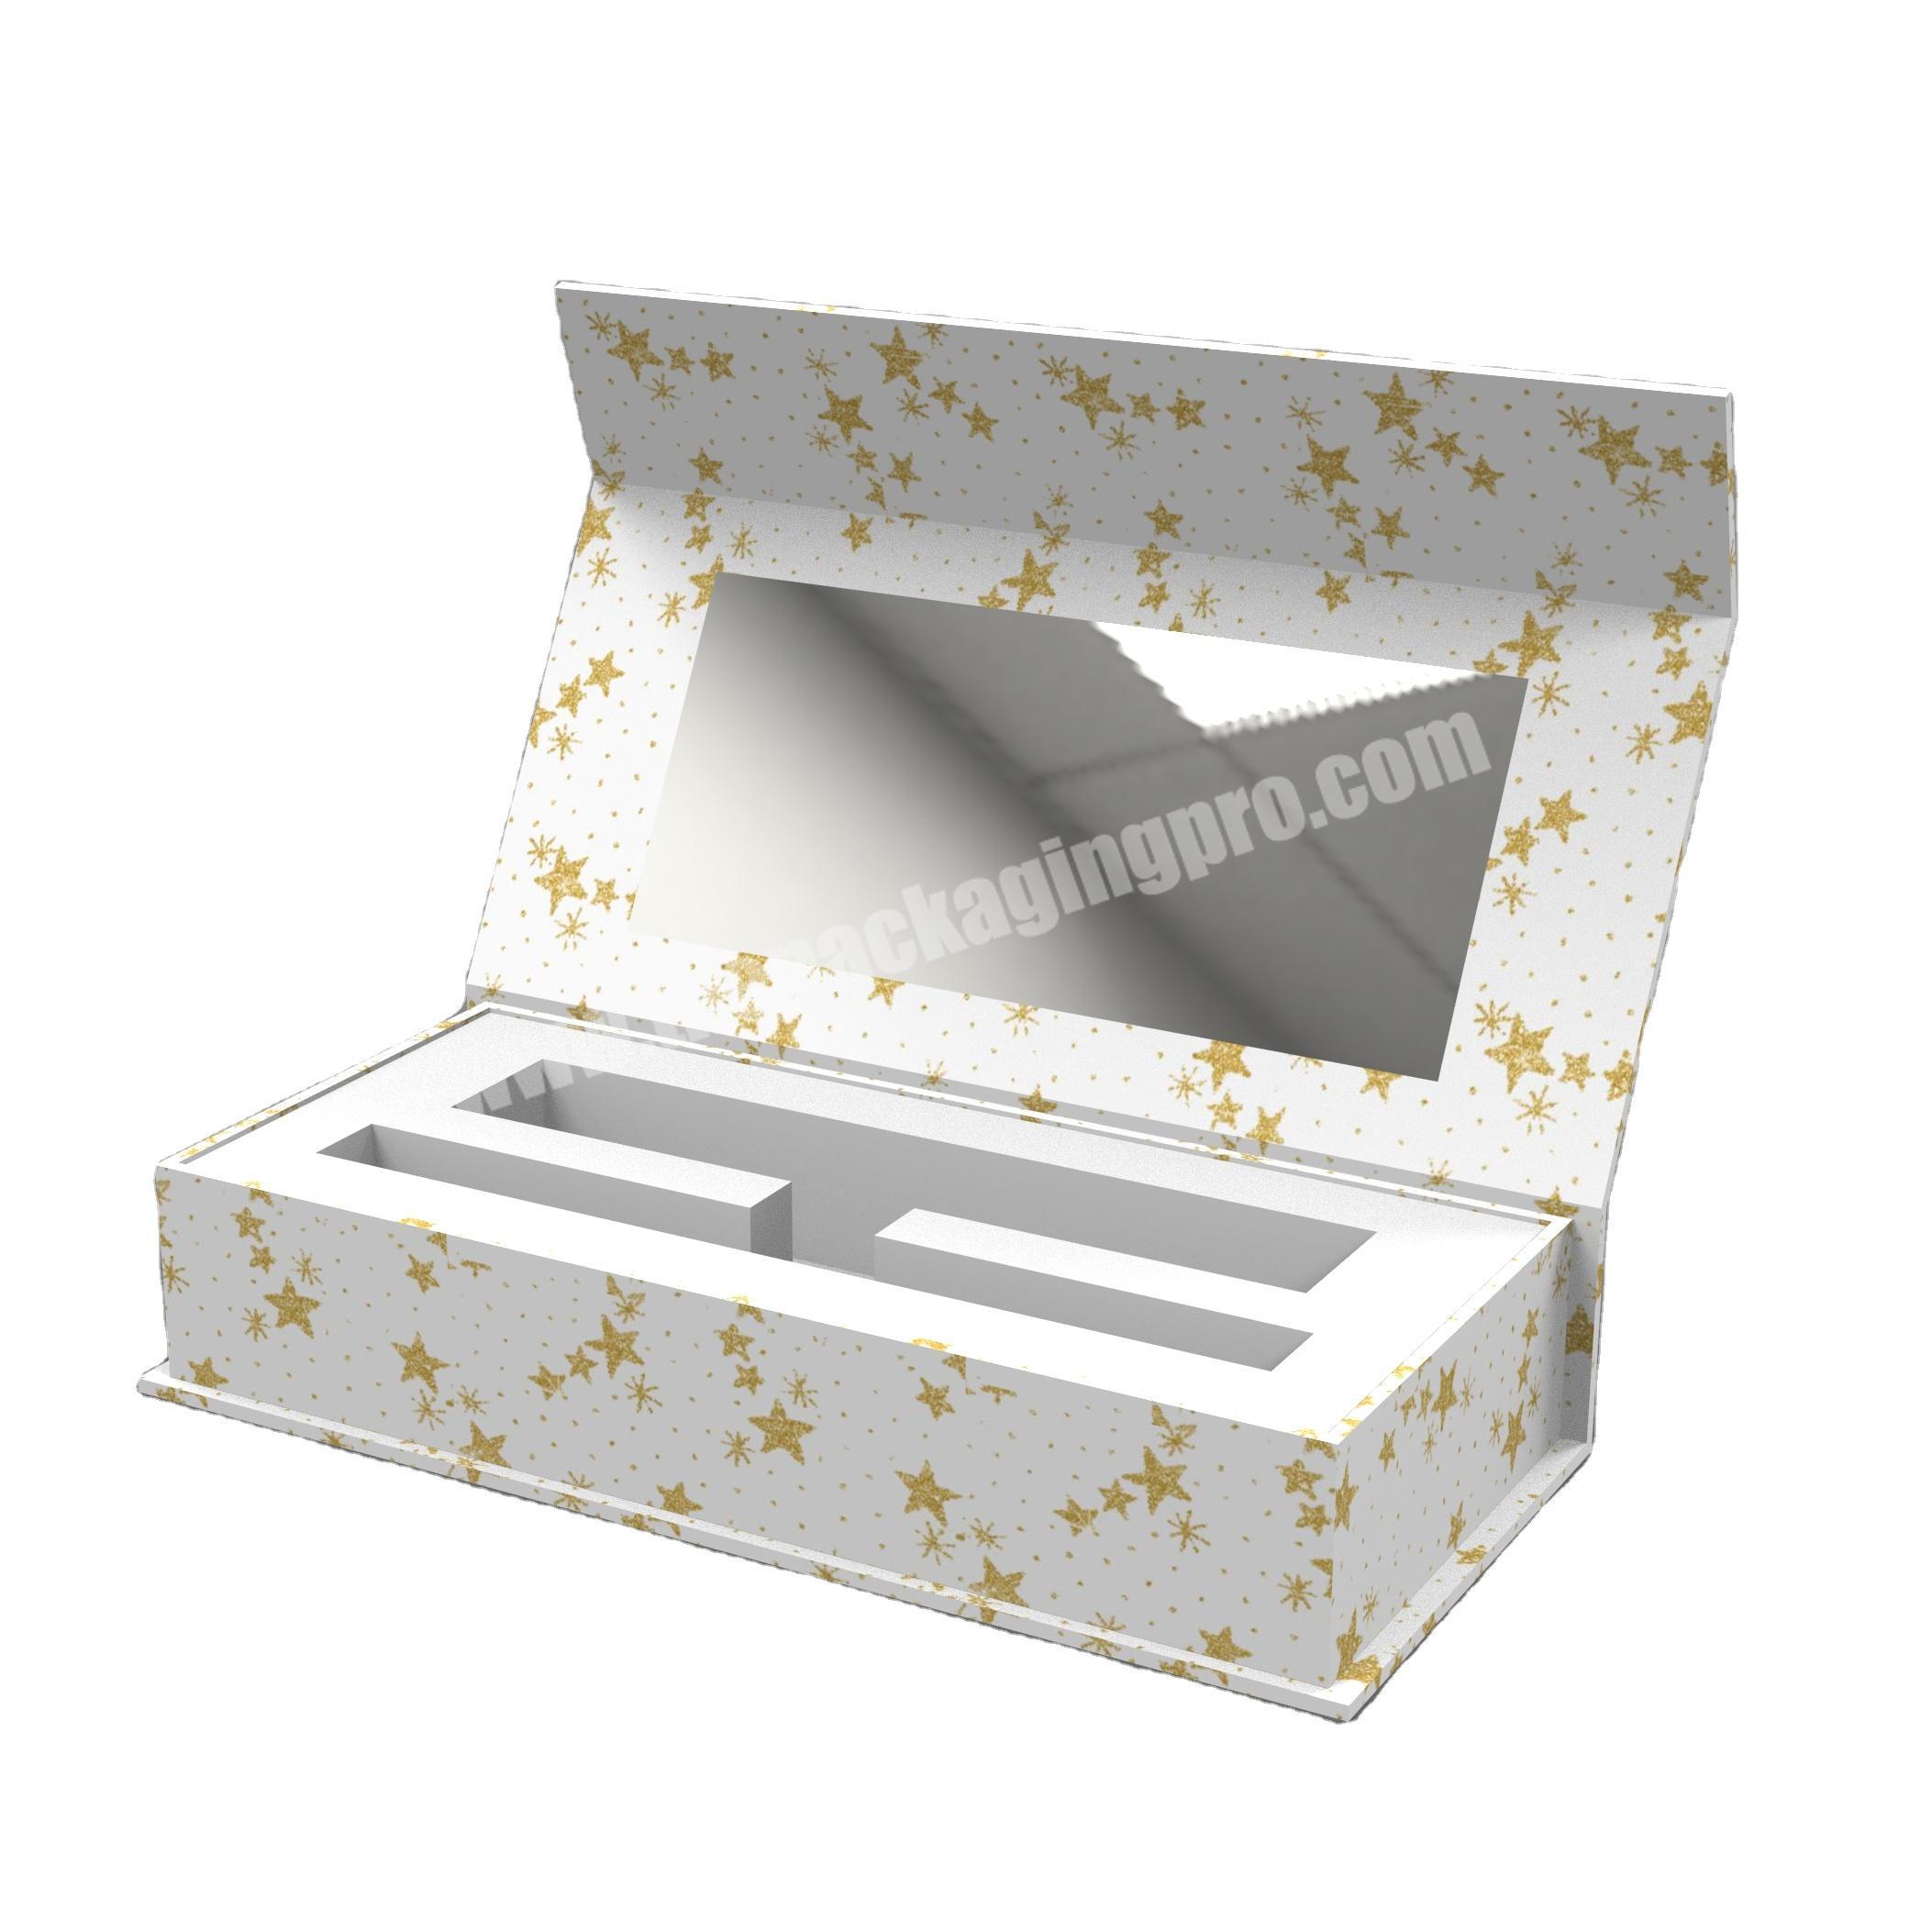 Luxury customized logo magnetic lid packaging box with mirror skincare products rigid paper cardboard gift box for cosmetics